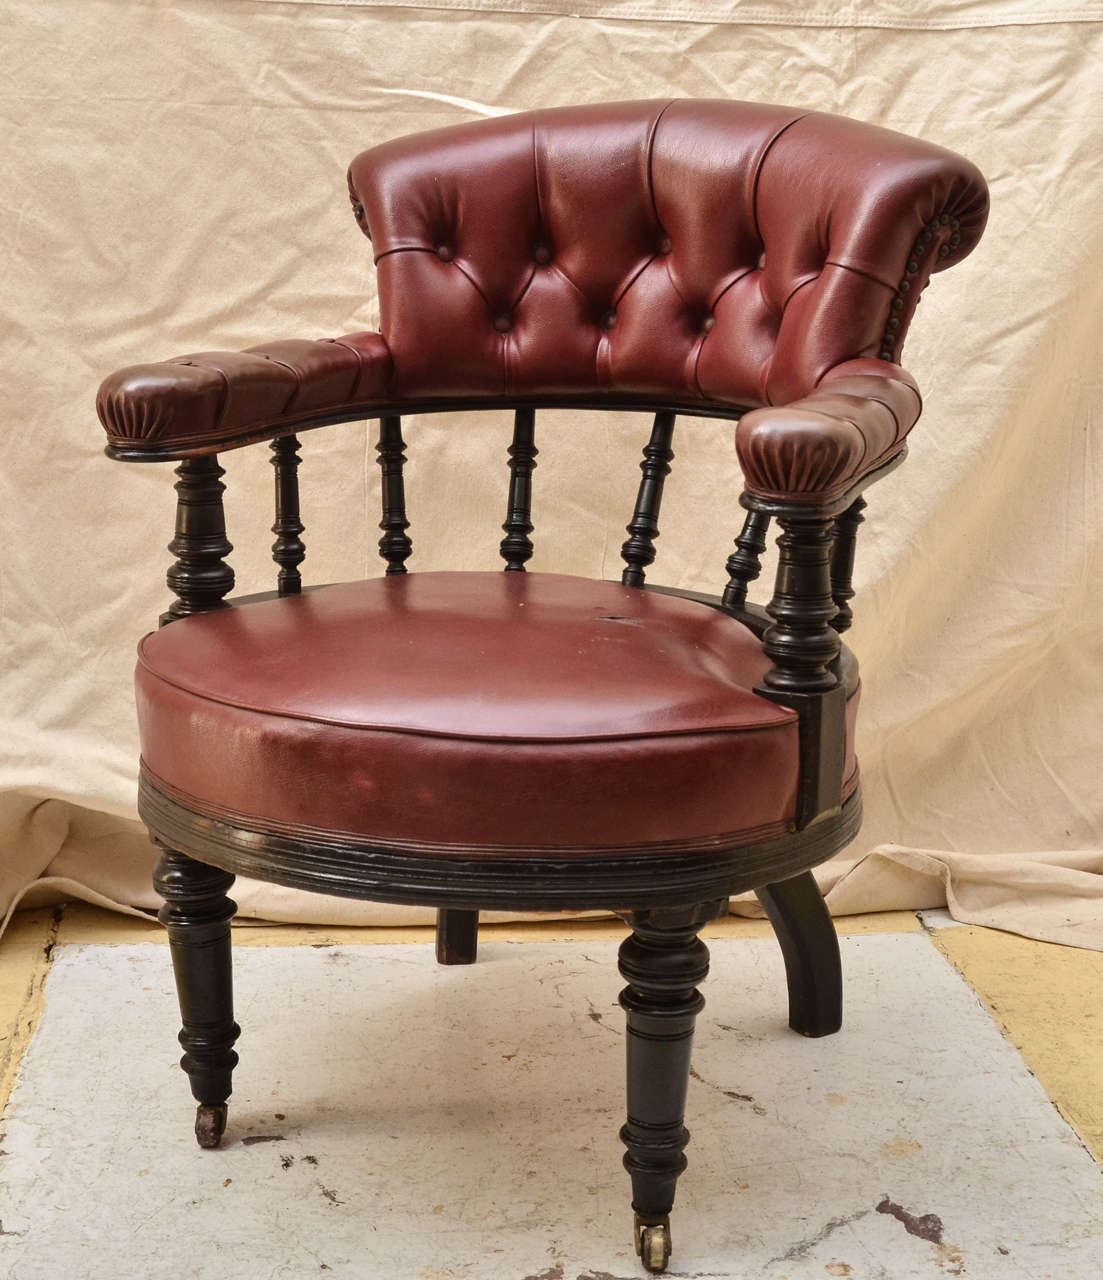 English Ebonised Circular Seat Open Arm Chair . Tufted Out Scrolled Back Rest & Arm Rests Supported By Turned Spindles. Turned Fronts Legs On Castors. Covered In Red Faux Leather. Great Desk Or Library Chair.